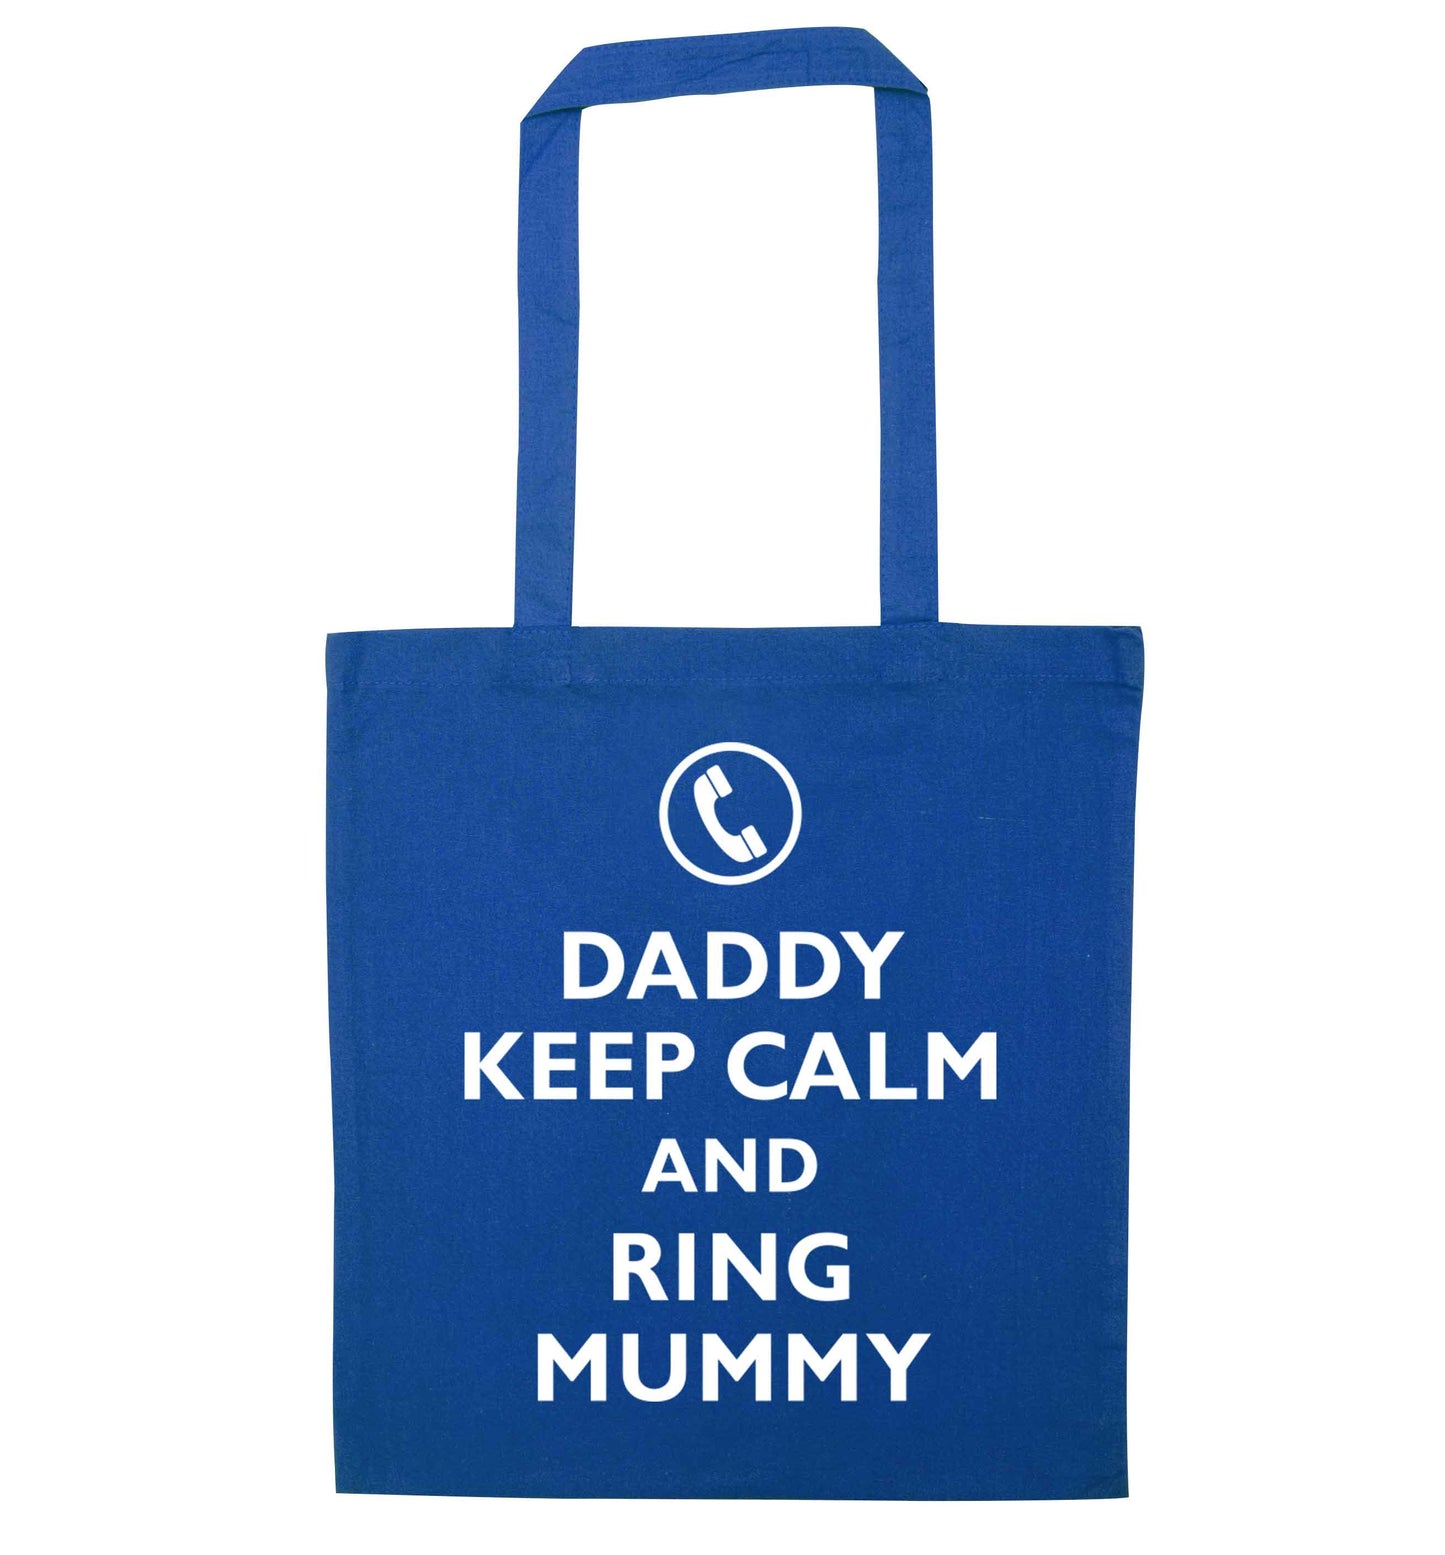 Daddy keep calm and ring mummy blue tote bag